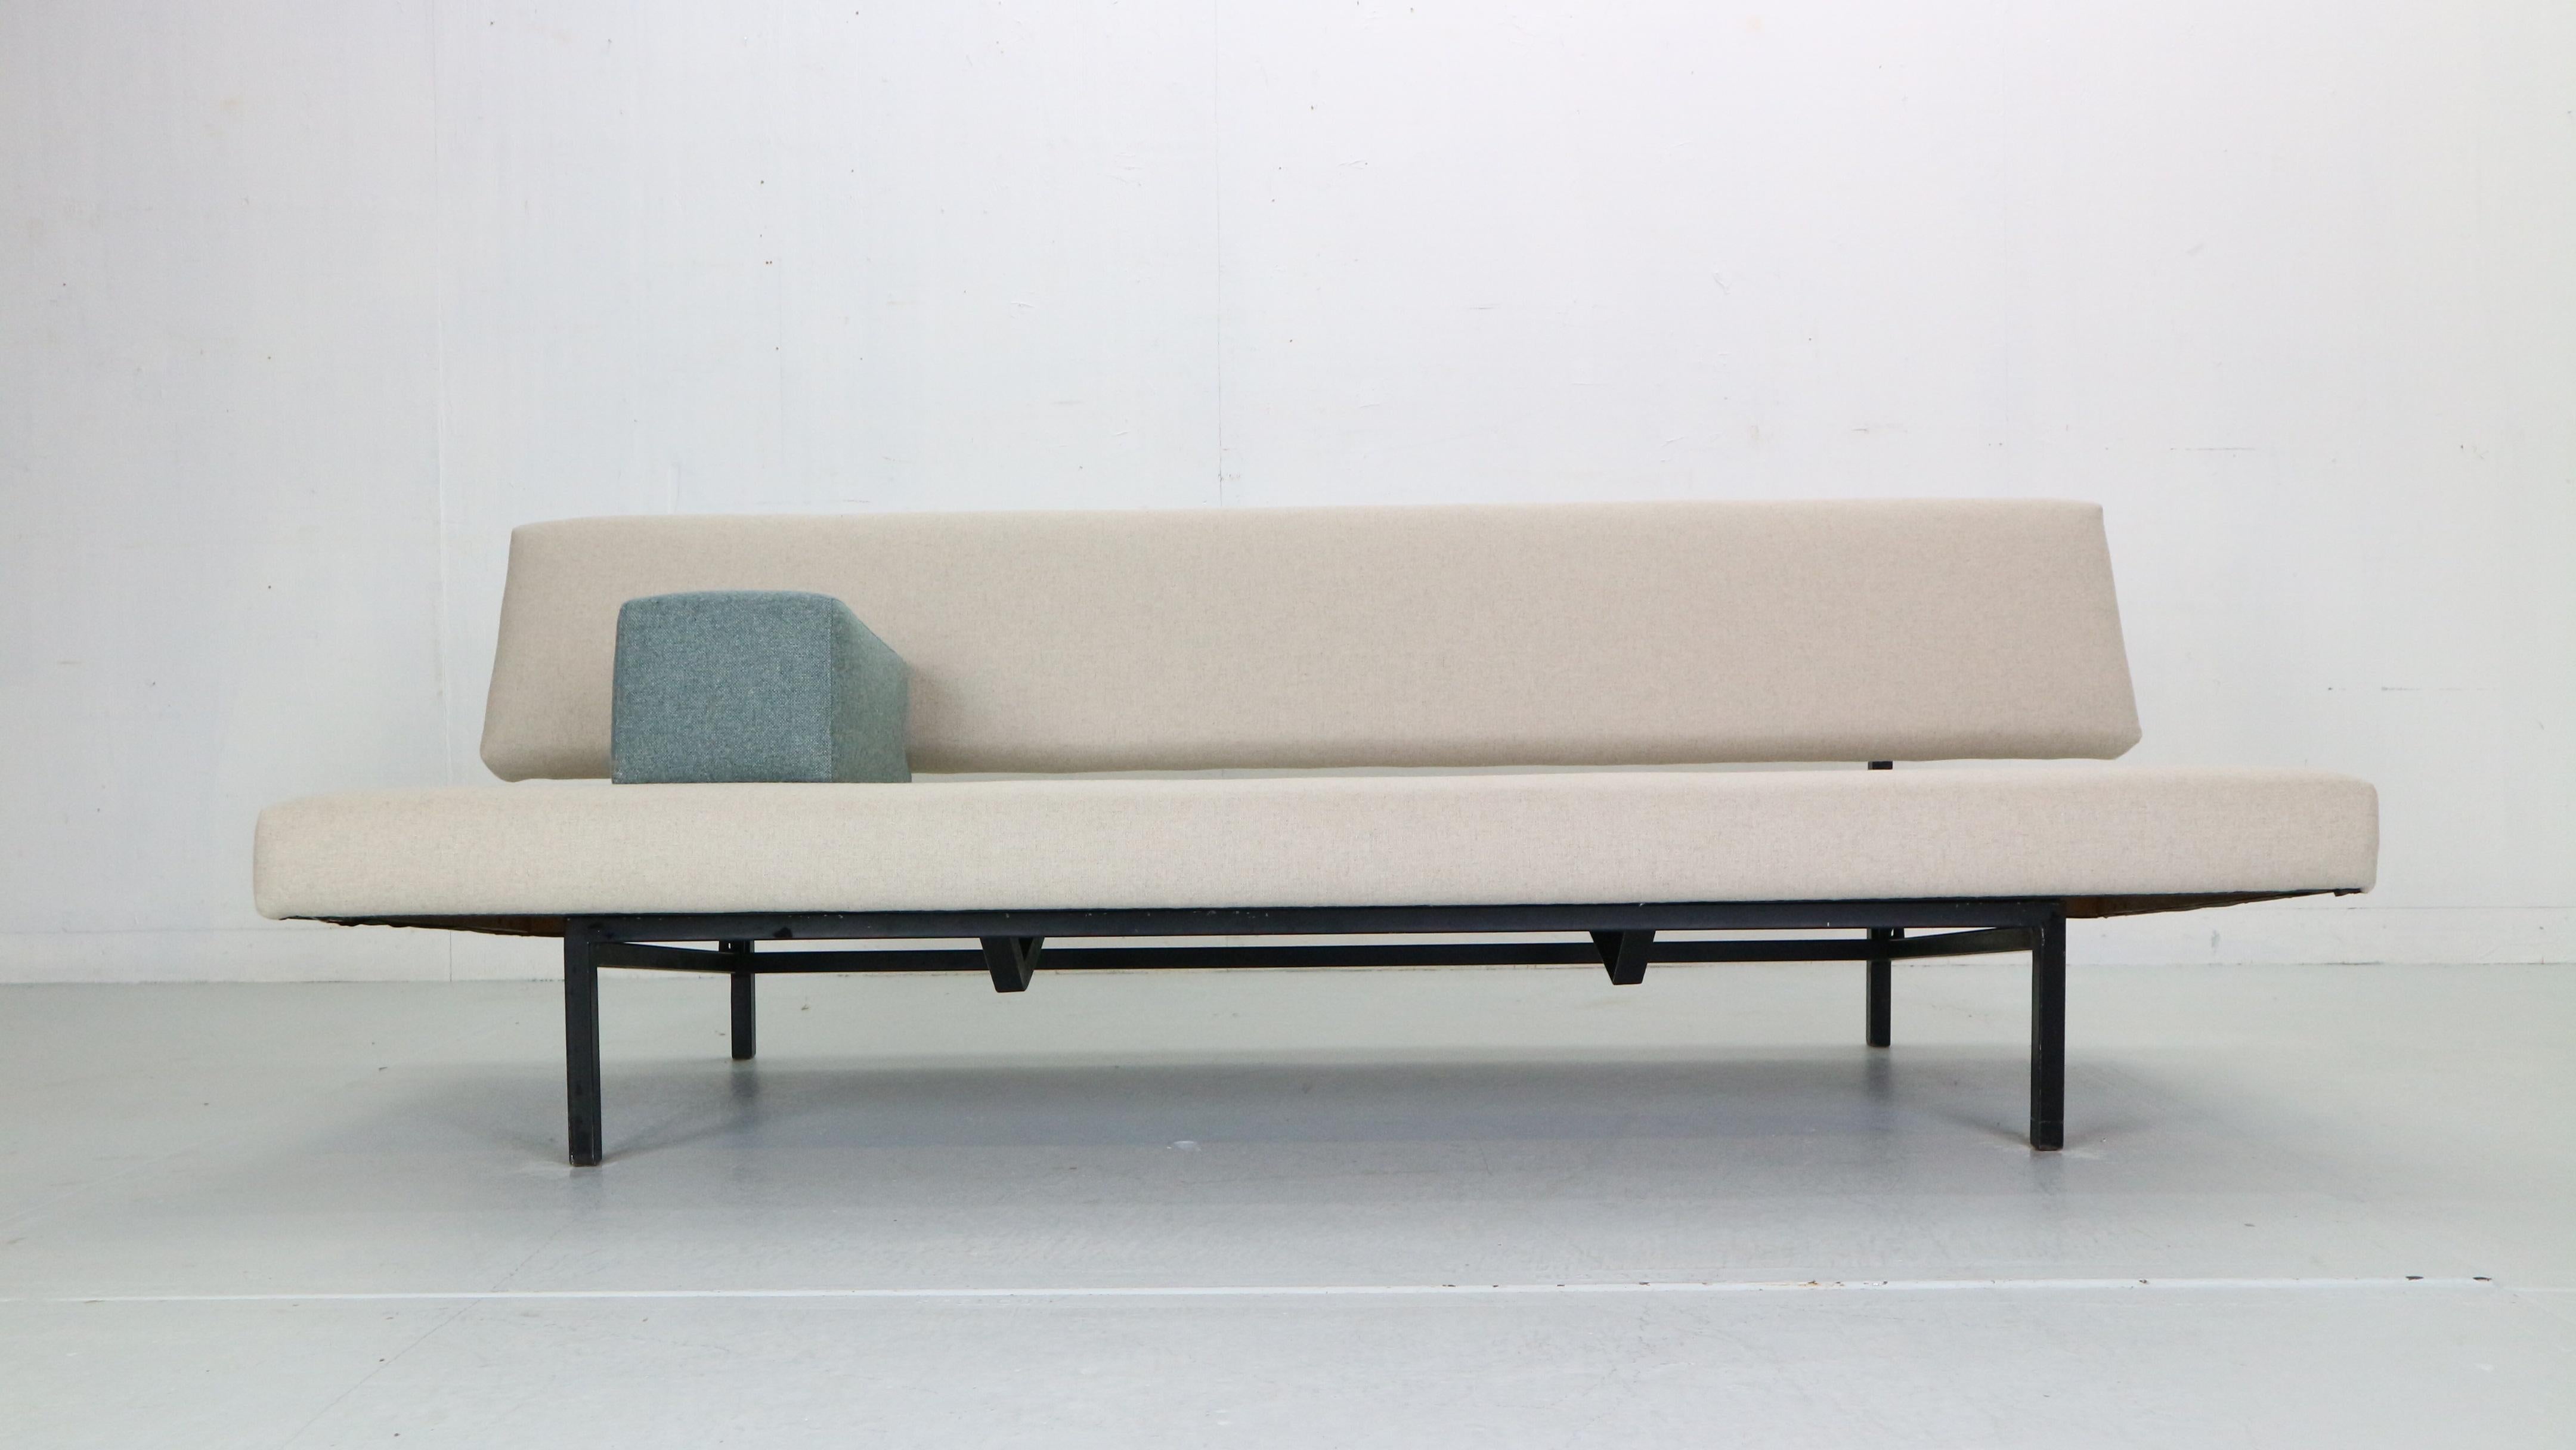 Wonderful Dutch Minimalist modern design sofa / daybed model ''BR43'' designed by Martin Visser for Spectrum 1960s, The Netherlands. 
Magnificent Minimalist design with black metal frame with newly upholstered off white wool fabric seating and